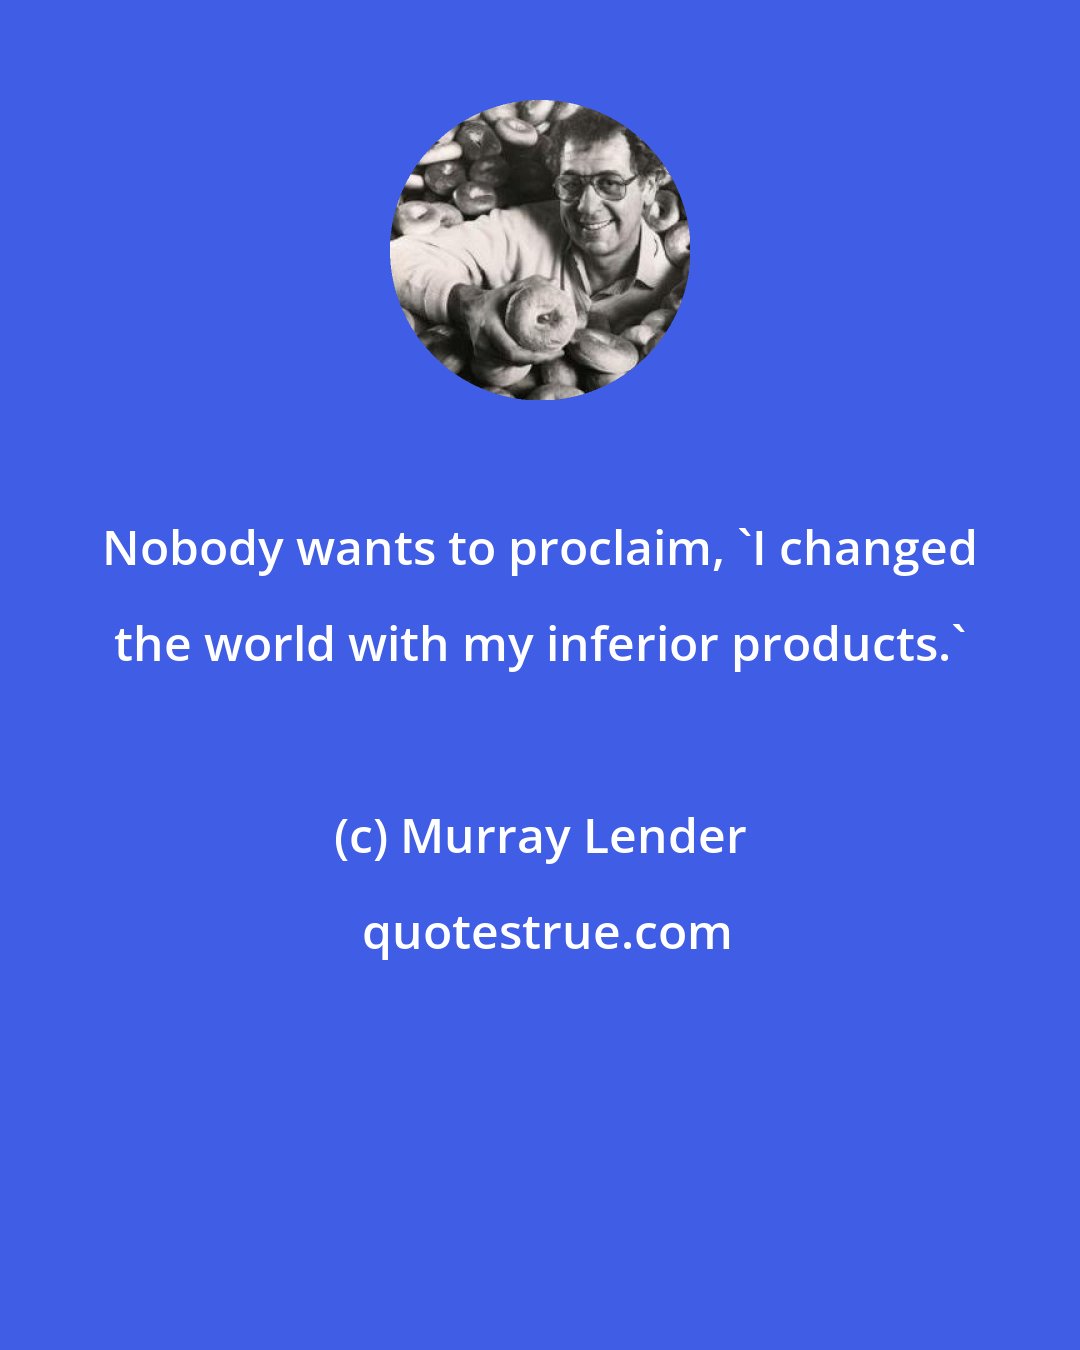 Murray Lender: Nobody wants to proclaim, 'I changed the world with my inferior products.'